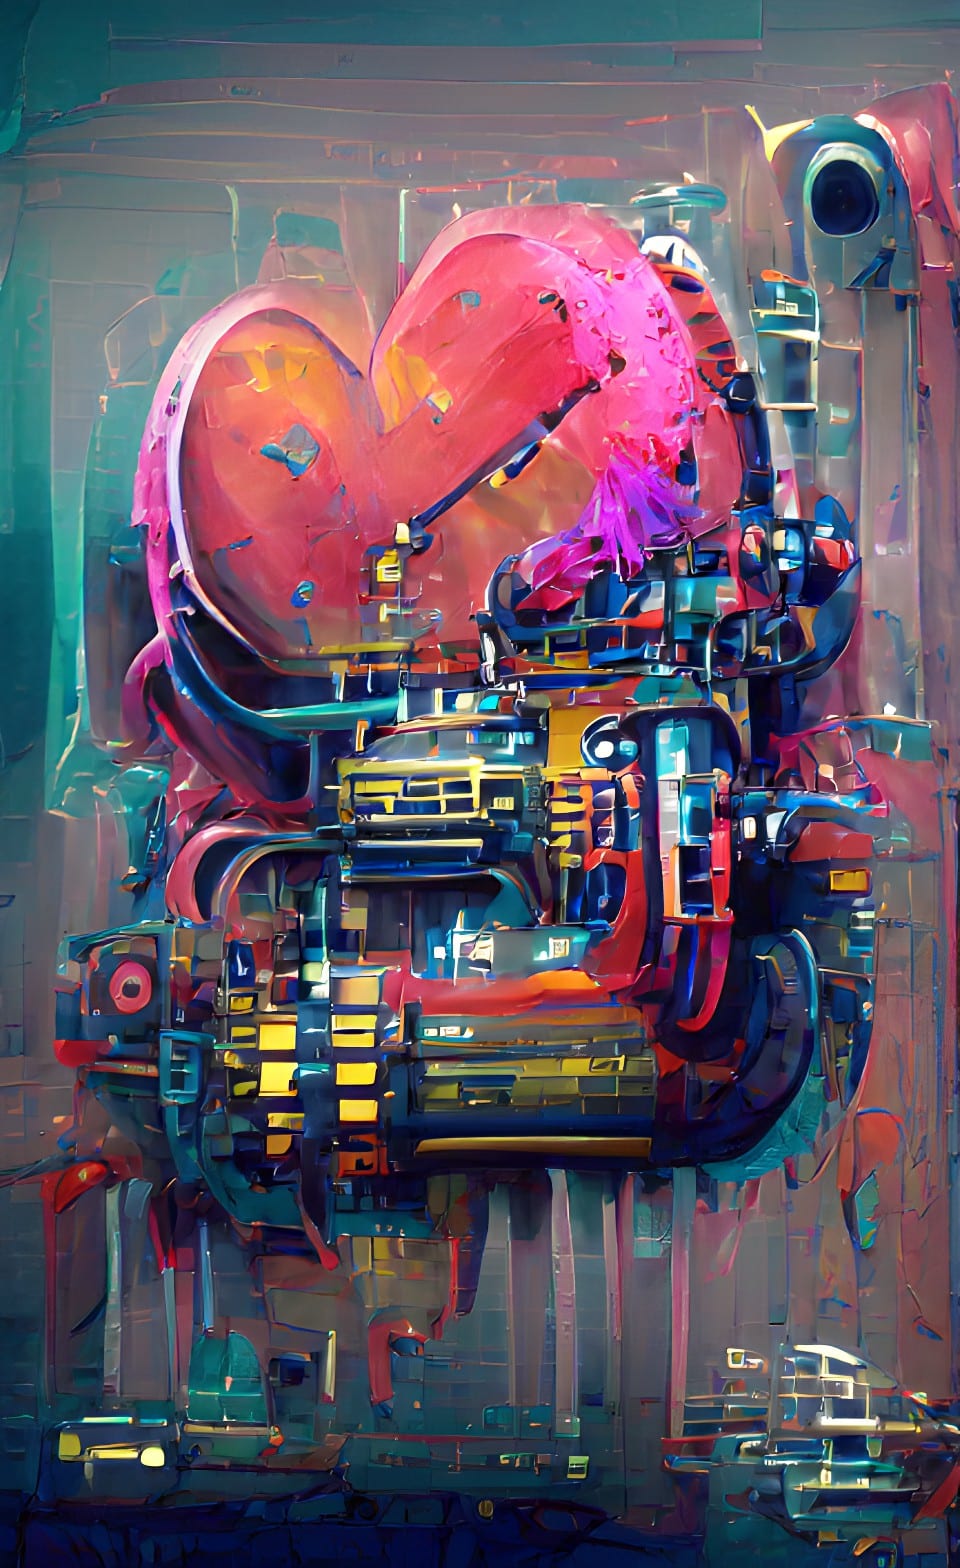 The Heart of a Machine